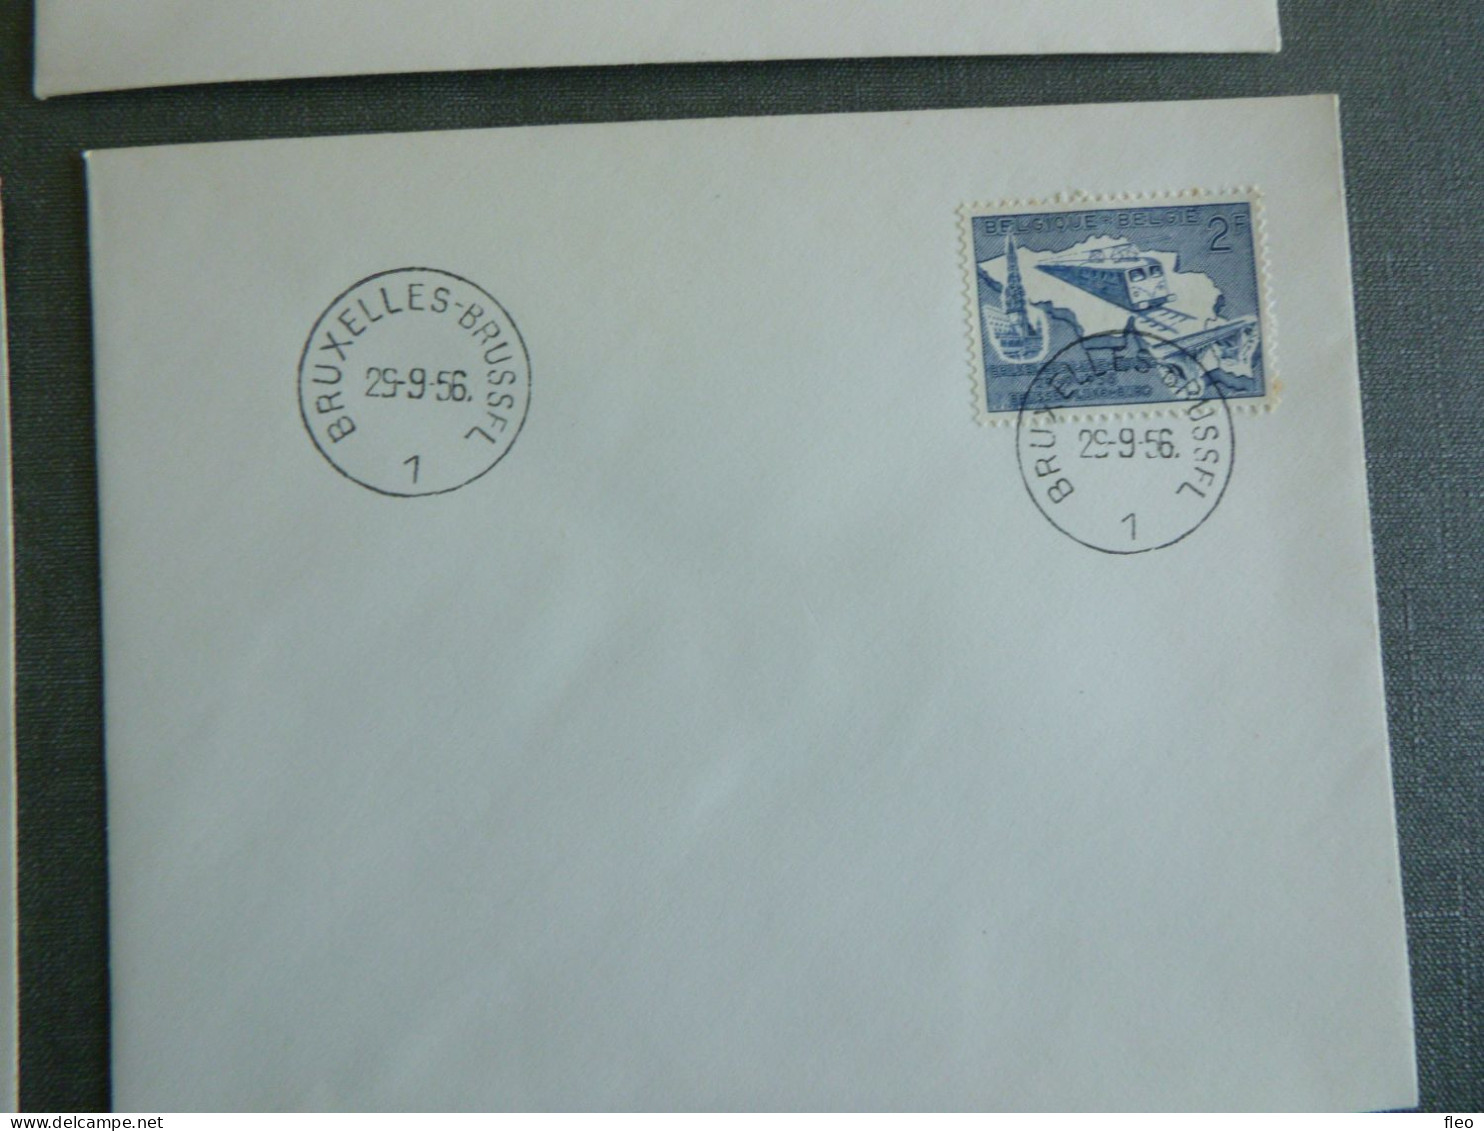 1956 987/989 & 990 & 994/995 & 996 & 997 & 998/1004 FDC's